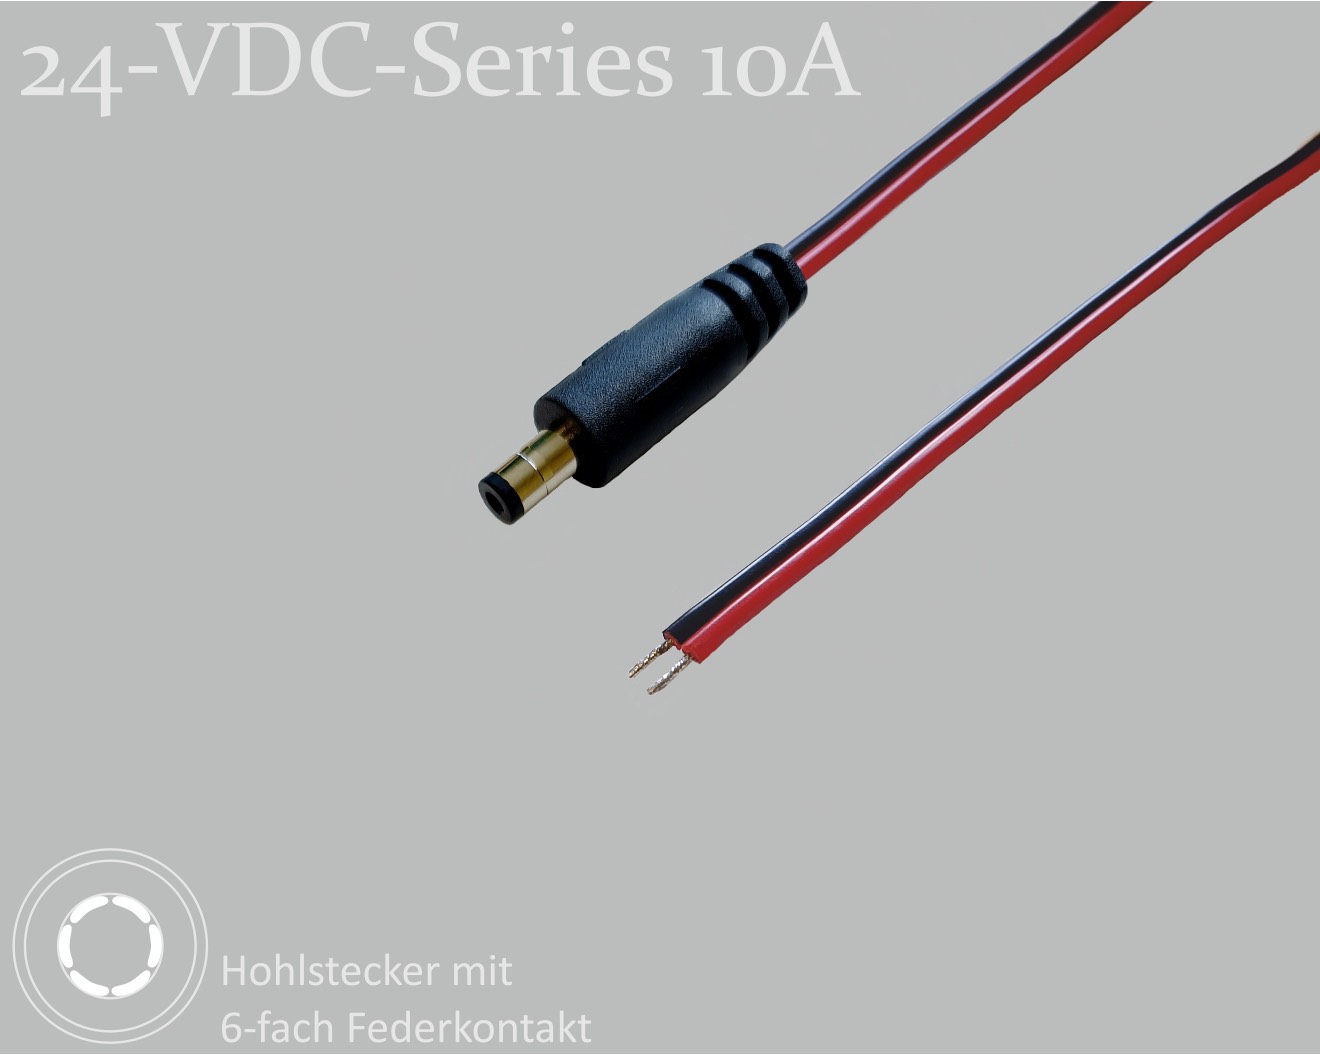 24-VDC-Series 10A, DC connection cable, DC plug with 6-spring contact 2.5x5.5x9.5mm, flat cable 2x0.75mm², red/black, tinned ends, 1.5m